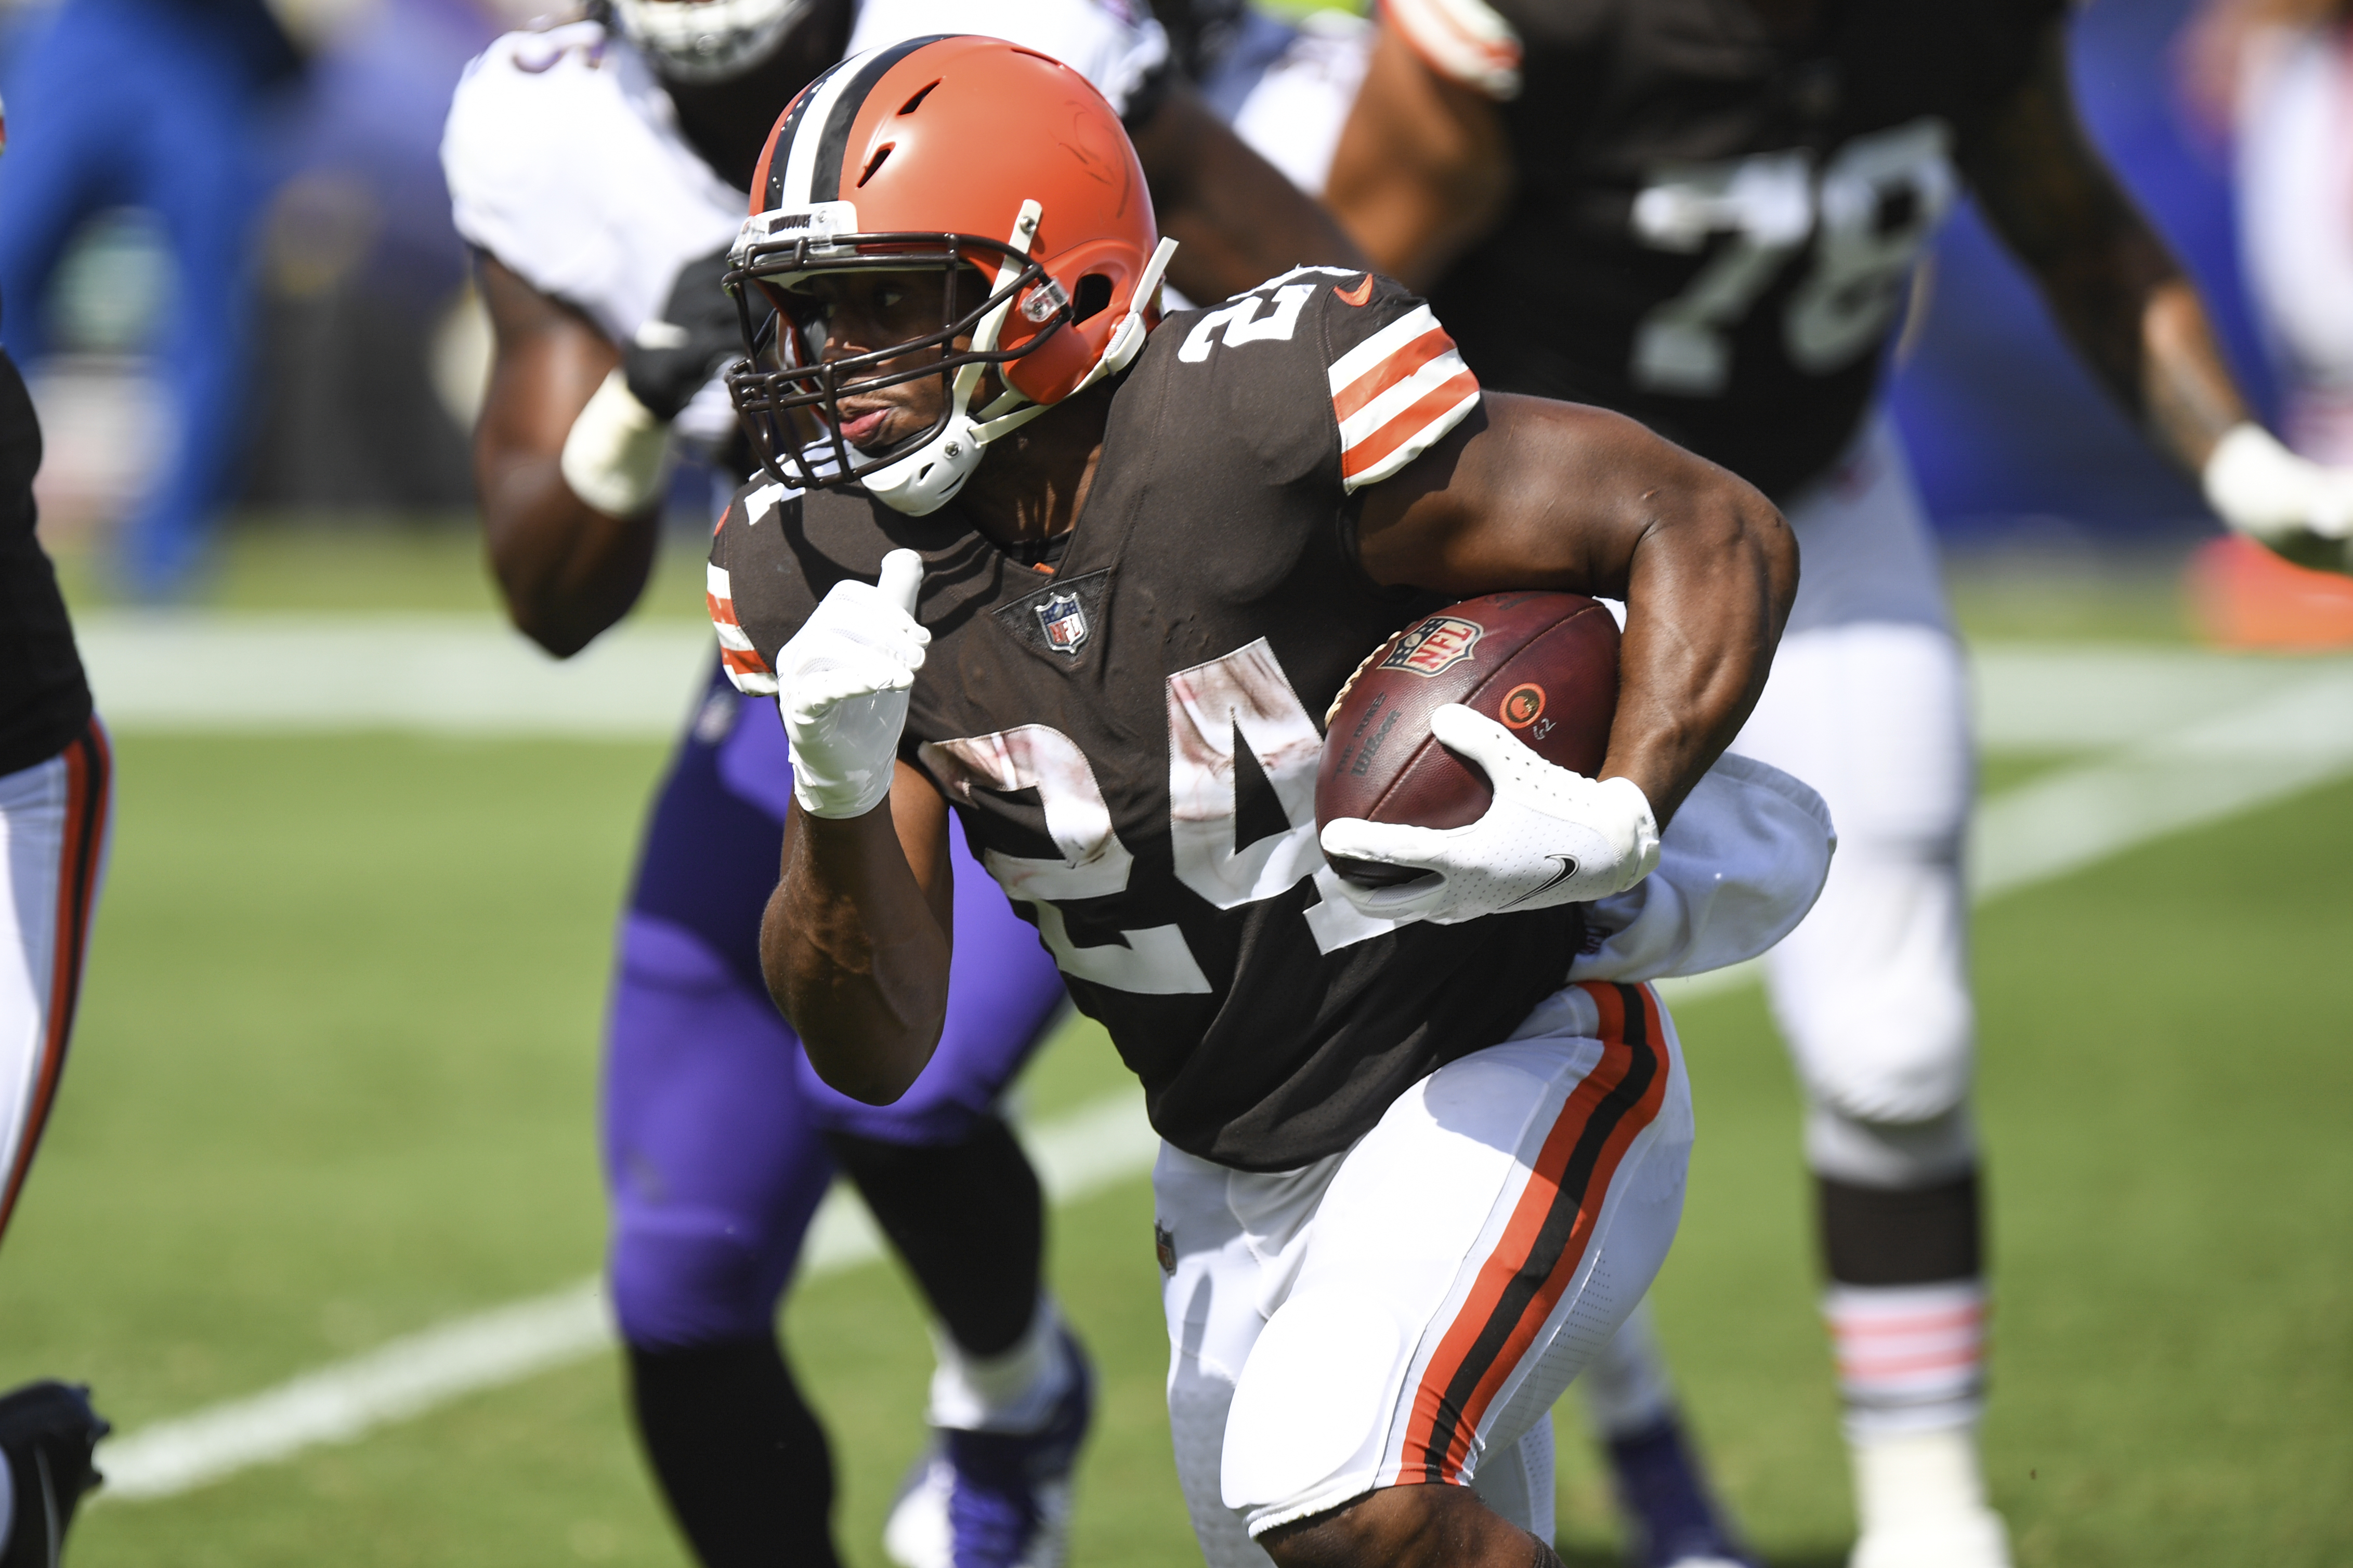 Nick Chubb signs his 3-year contract extension with the Browns